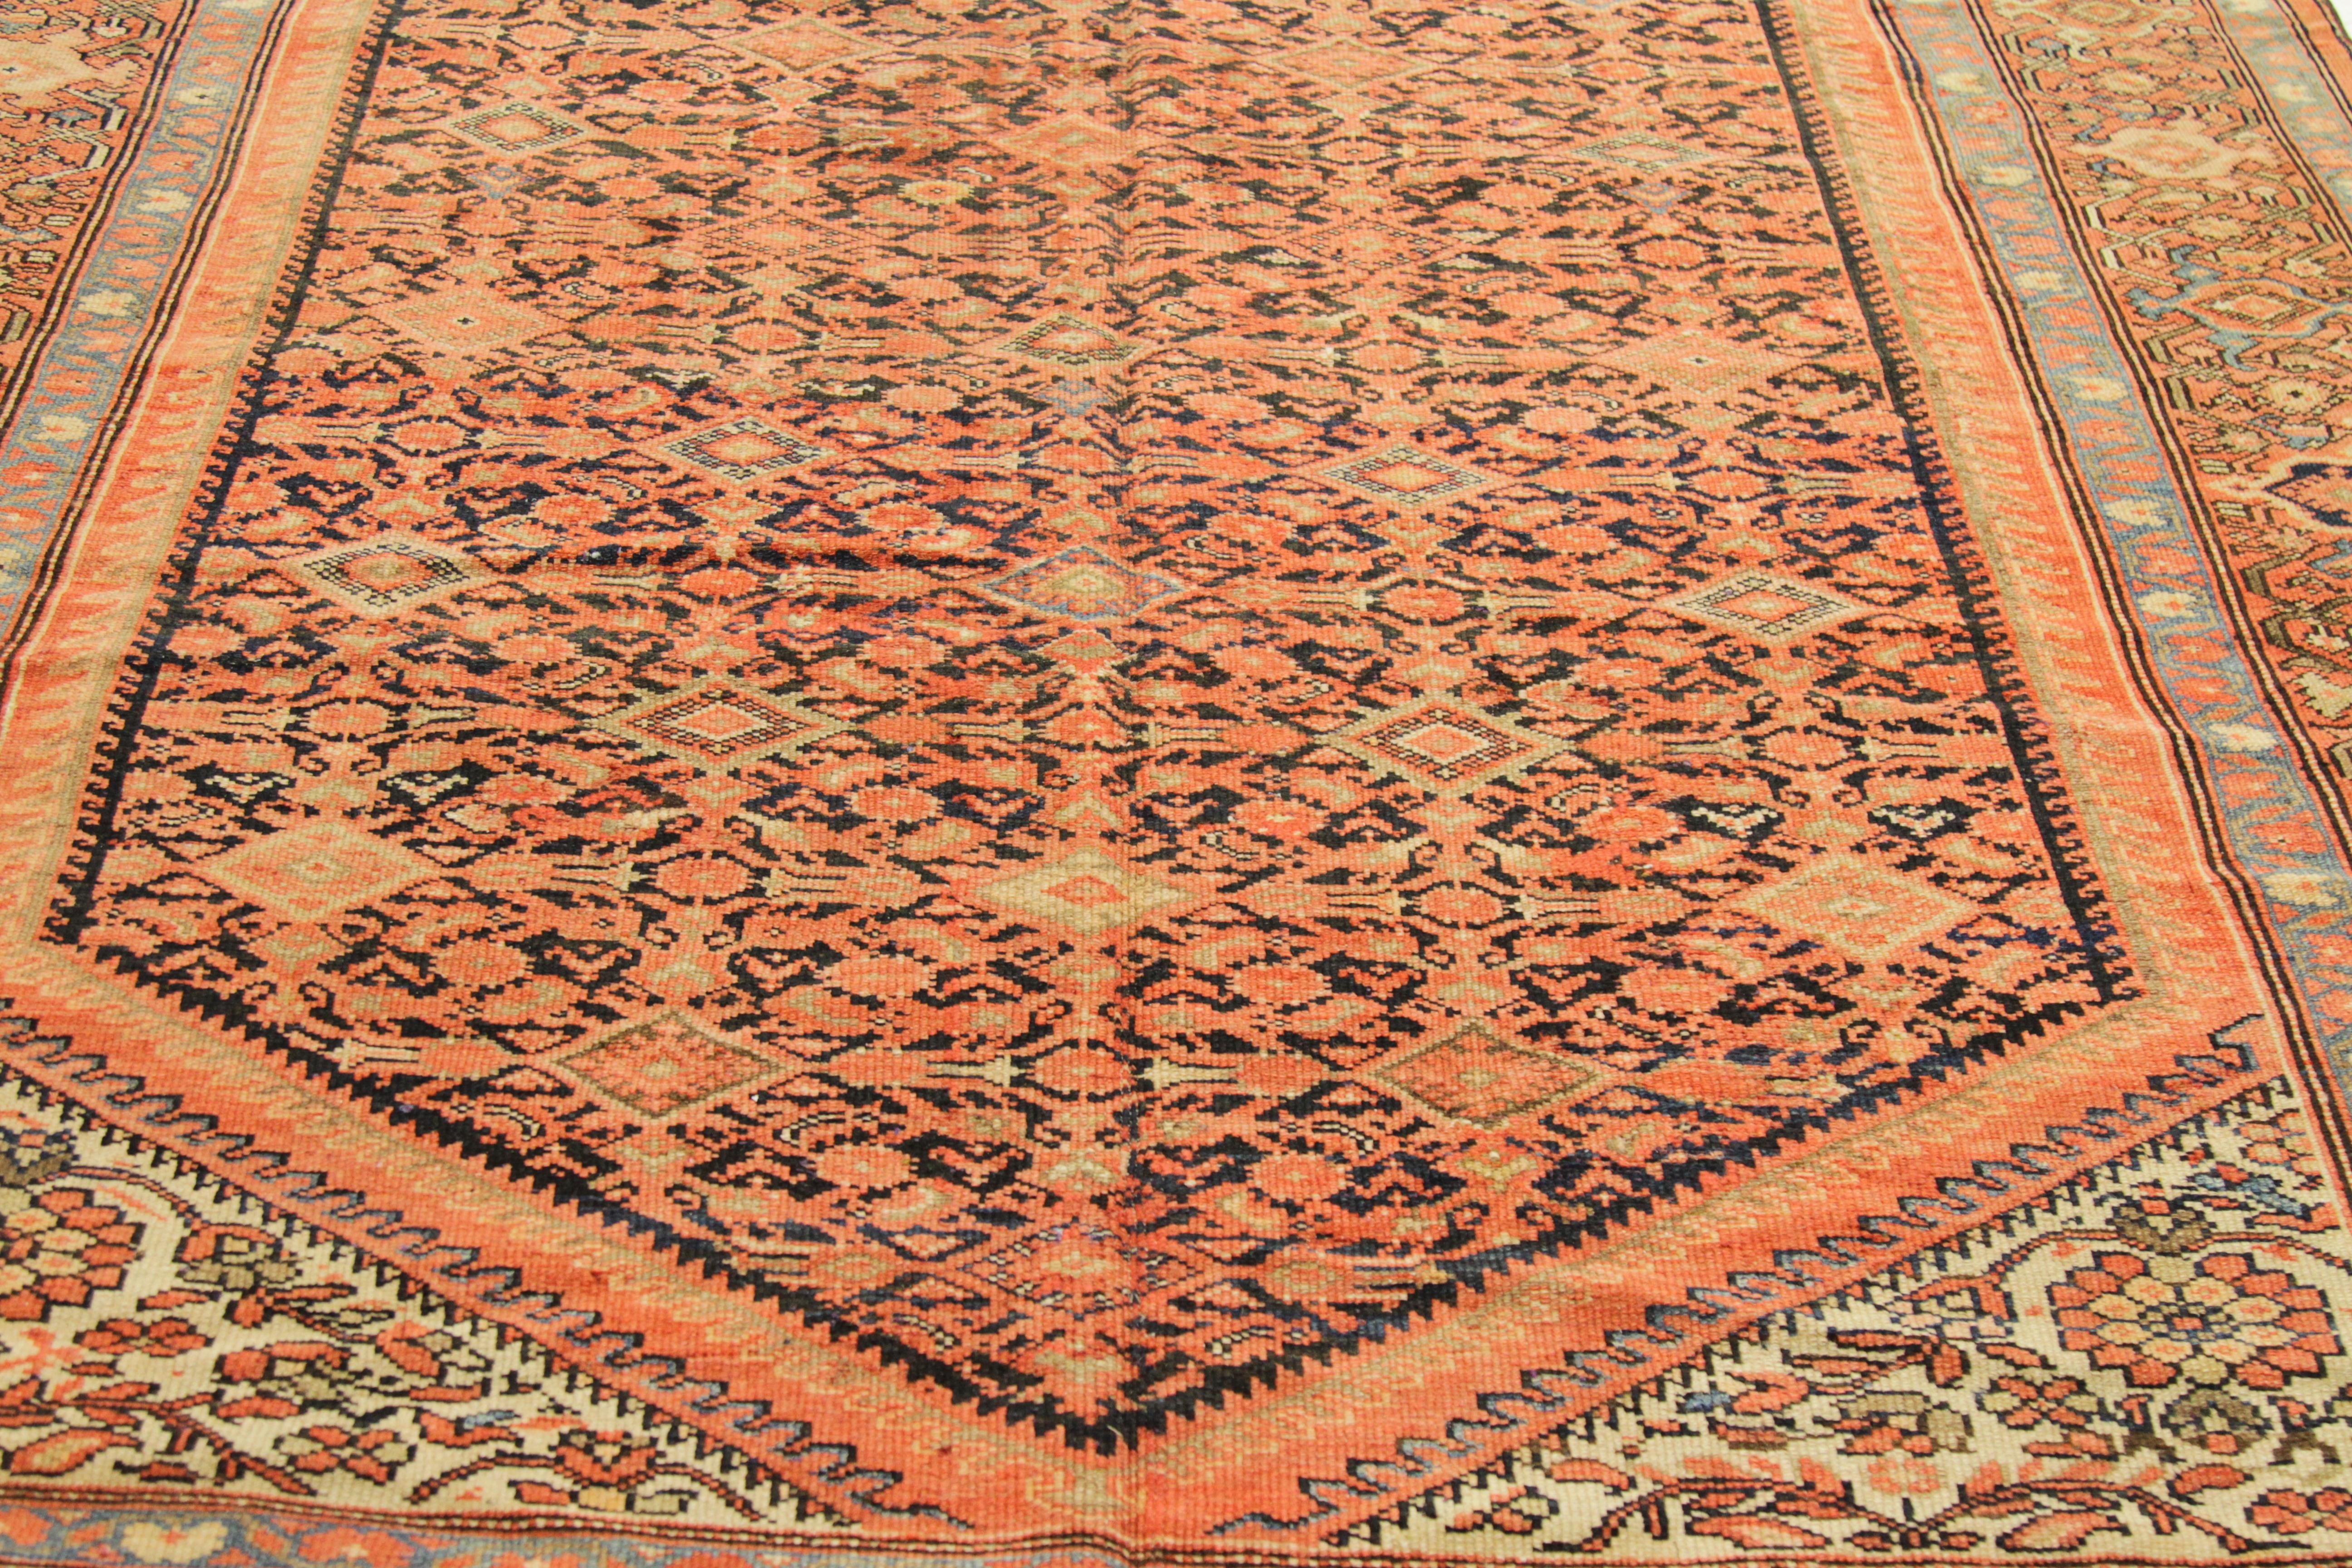 Antique Persian Rug Malayer Design with Orange and Black Details, circa 1930s For Sale 4